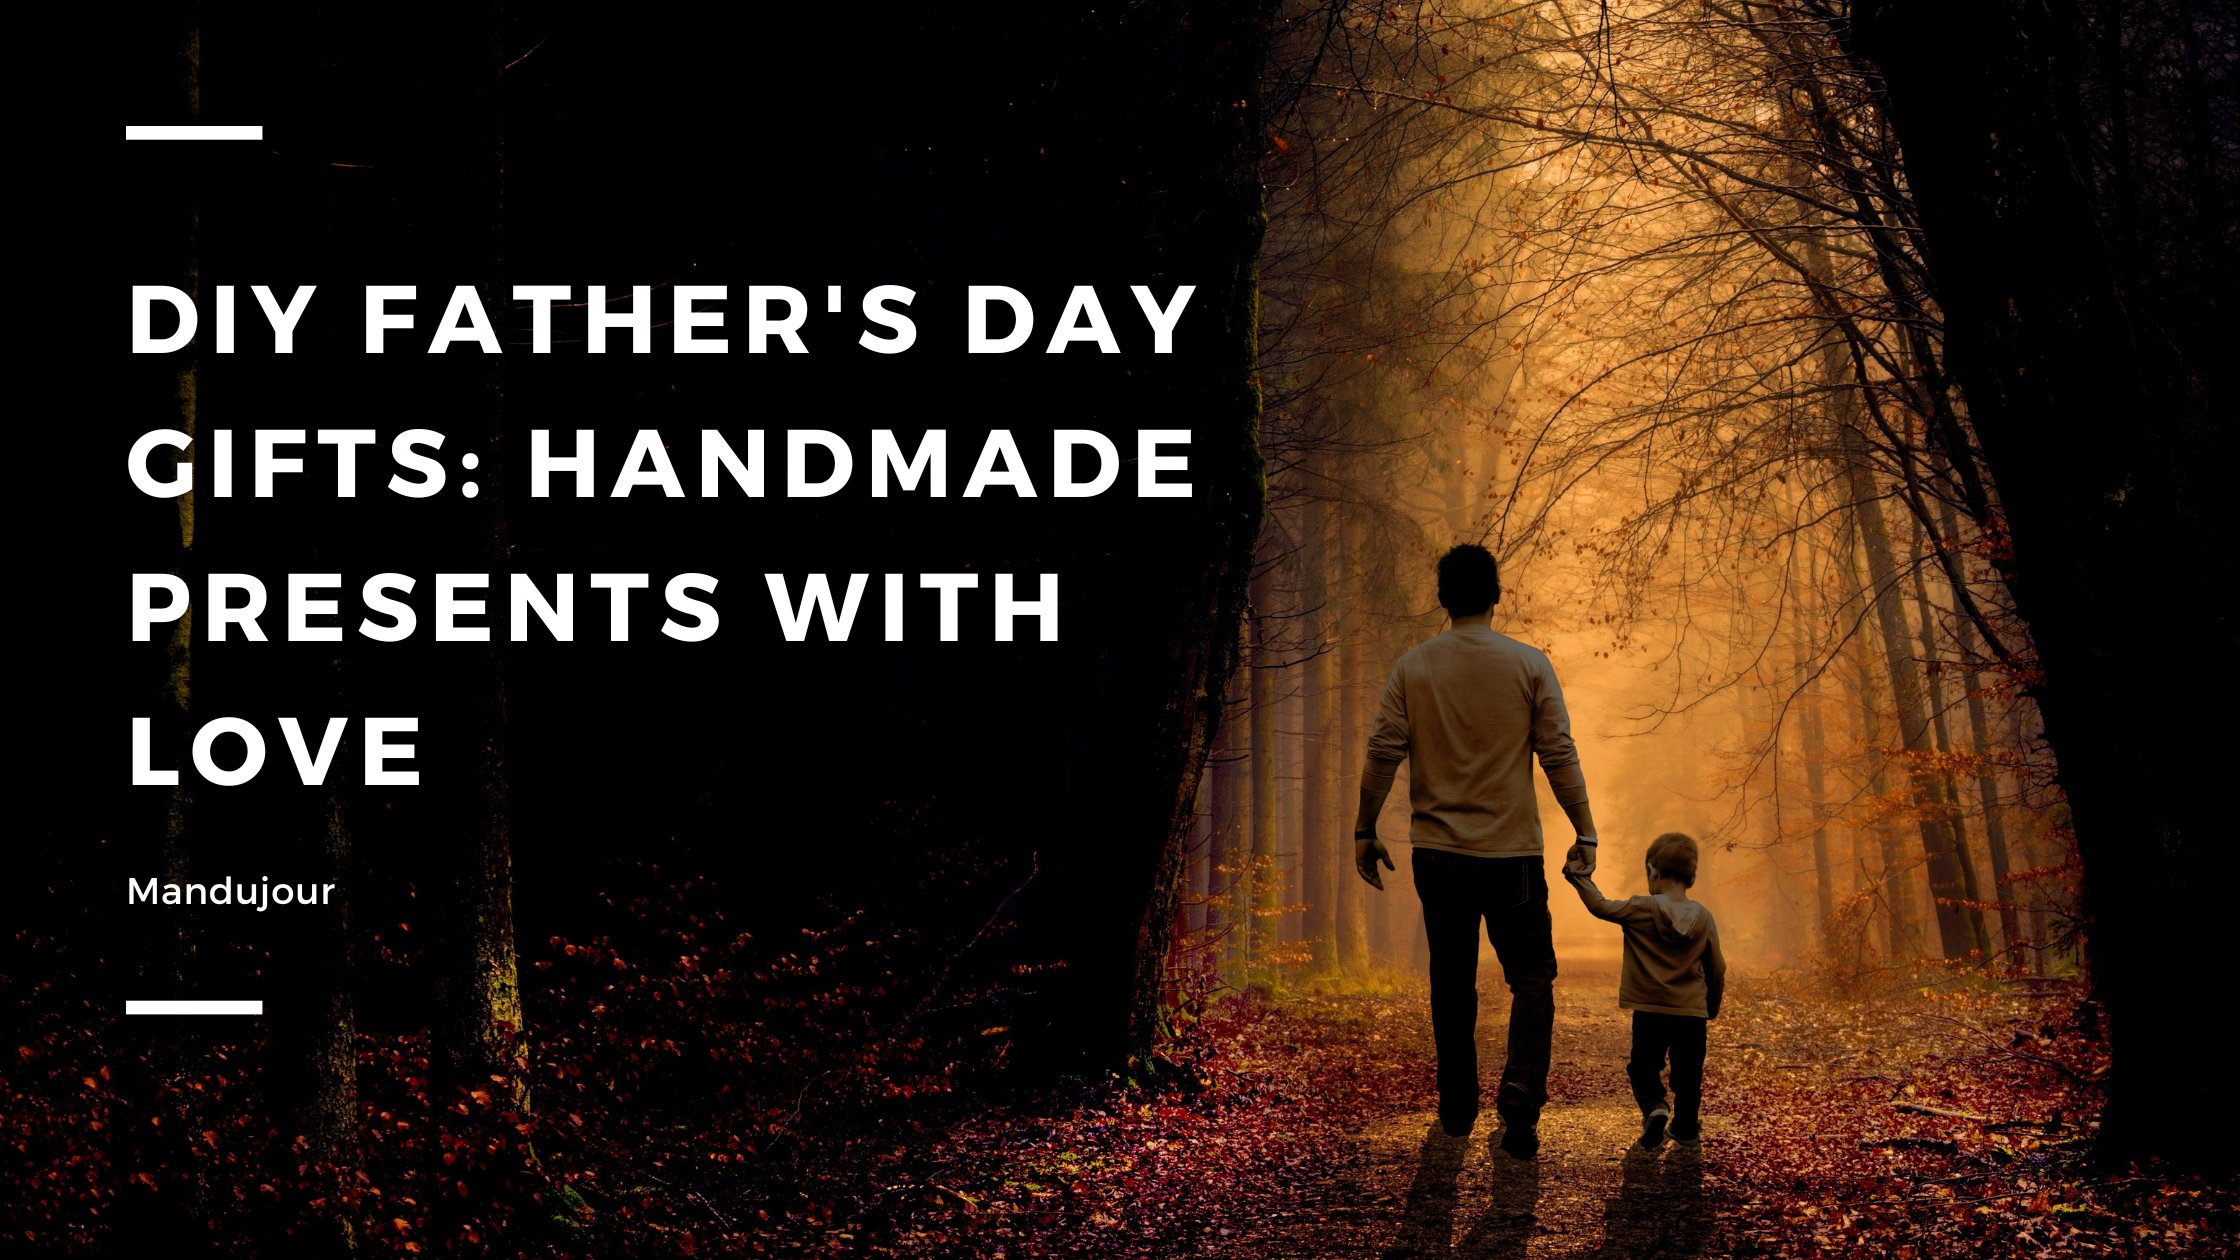 40 Easy DIY Father's Day Gifts Homemade Presents For Dad, 42% OFF